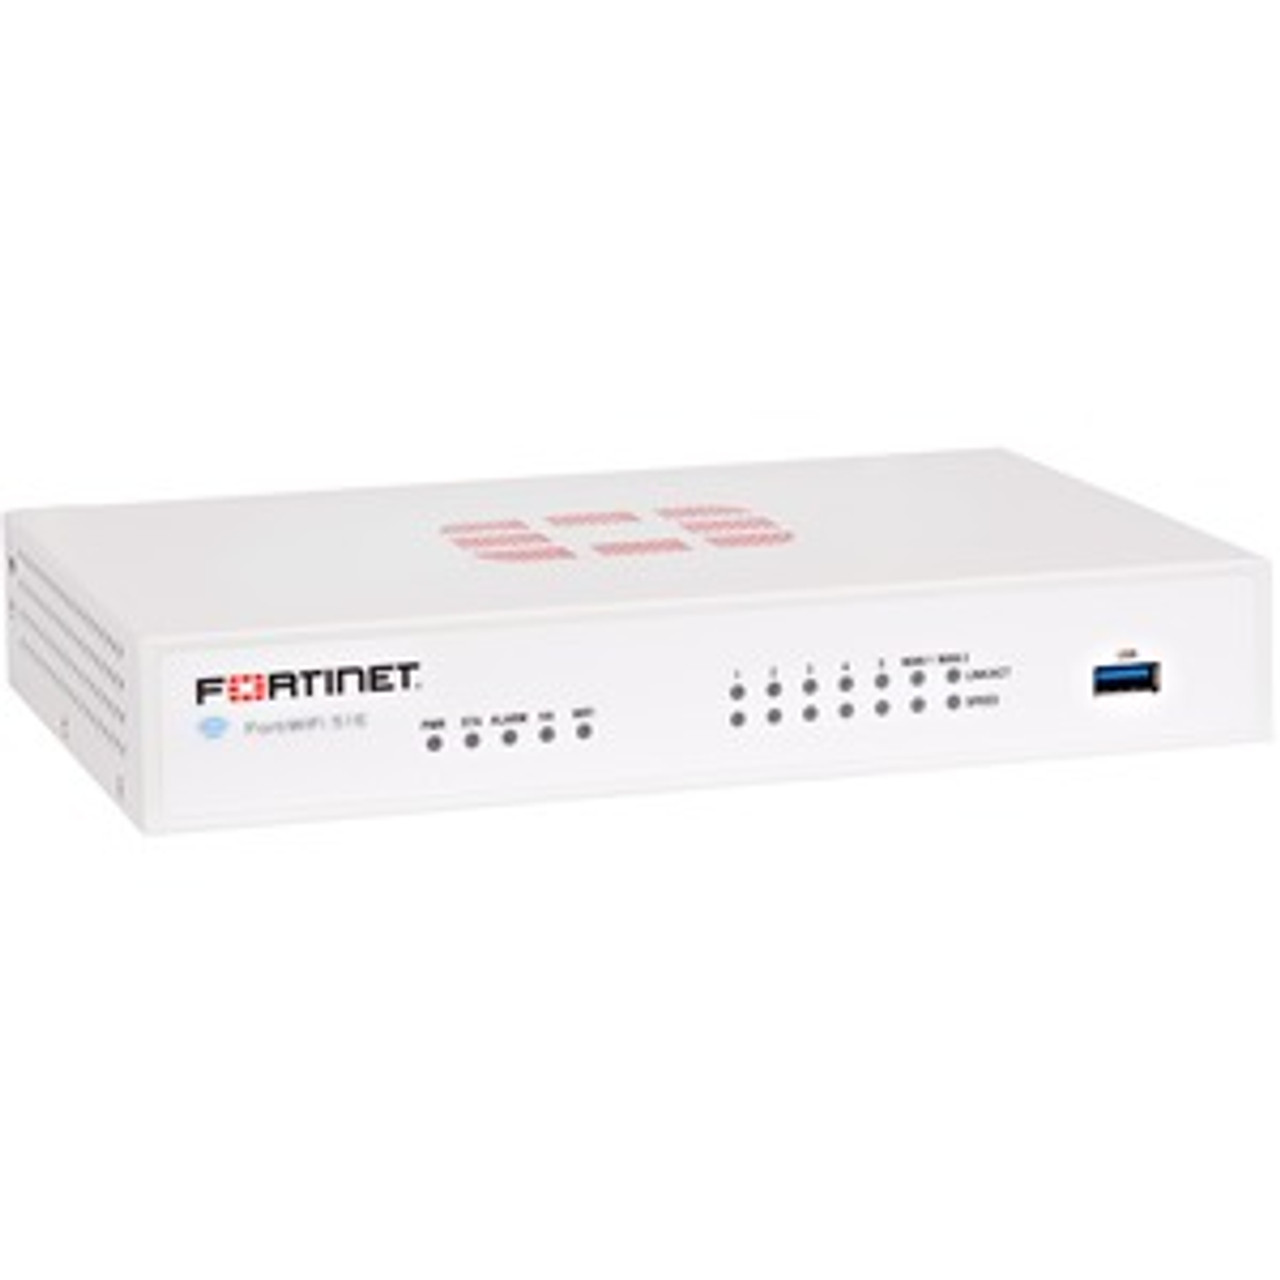 Fortinet FortiWifi FWF-51E Network Security/Firewall Appliance - 7 Port - 10/100/1000Base-T - Gigabit Ethernet - Wireless LAN IEEE 802.11a/b/g/n - AES (256-bit), SHA-256 - 200 VPN - 5 x RJ-45 - 5 Years 24X7 Forticare and Fortiguard UTP - .